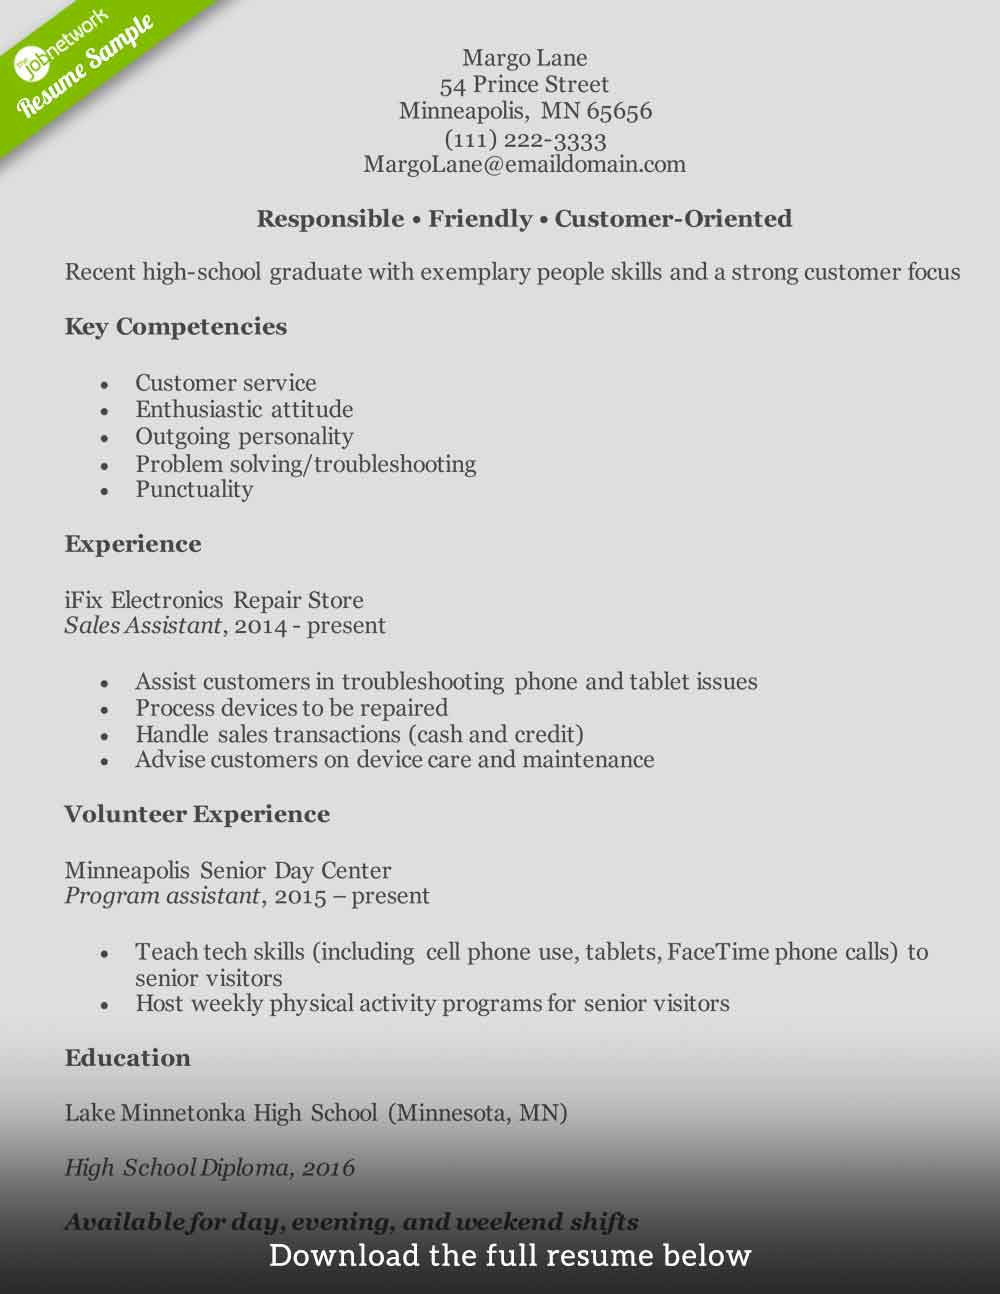 Entry Level Customer Service Resume Template Customer Service Resume -how to Write the Perfect One (examples)